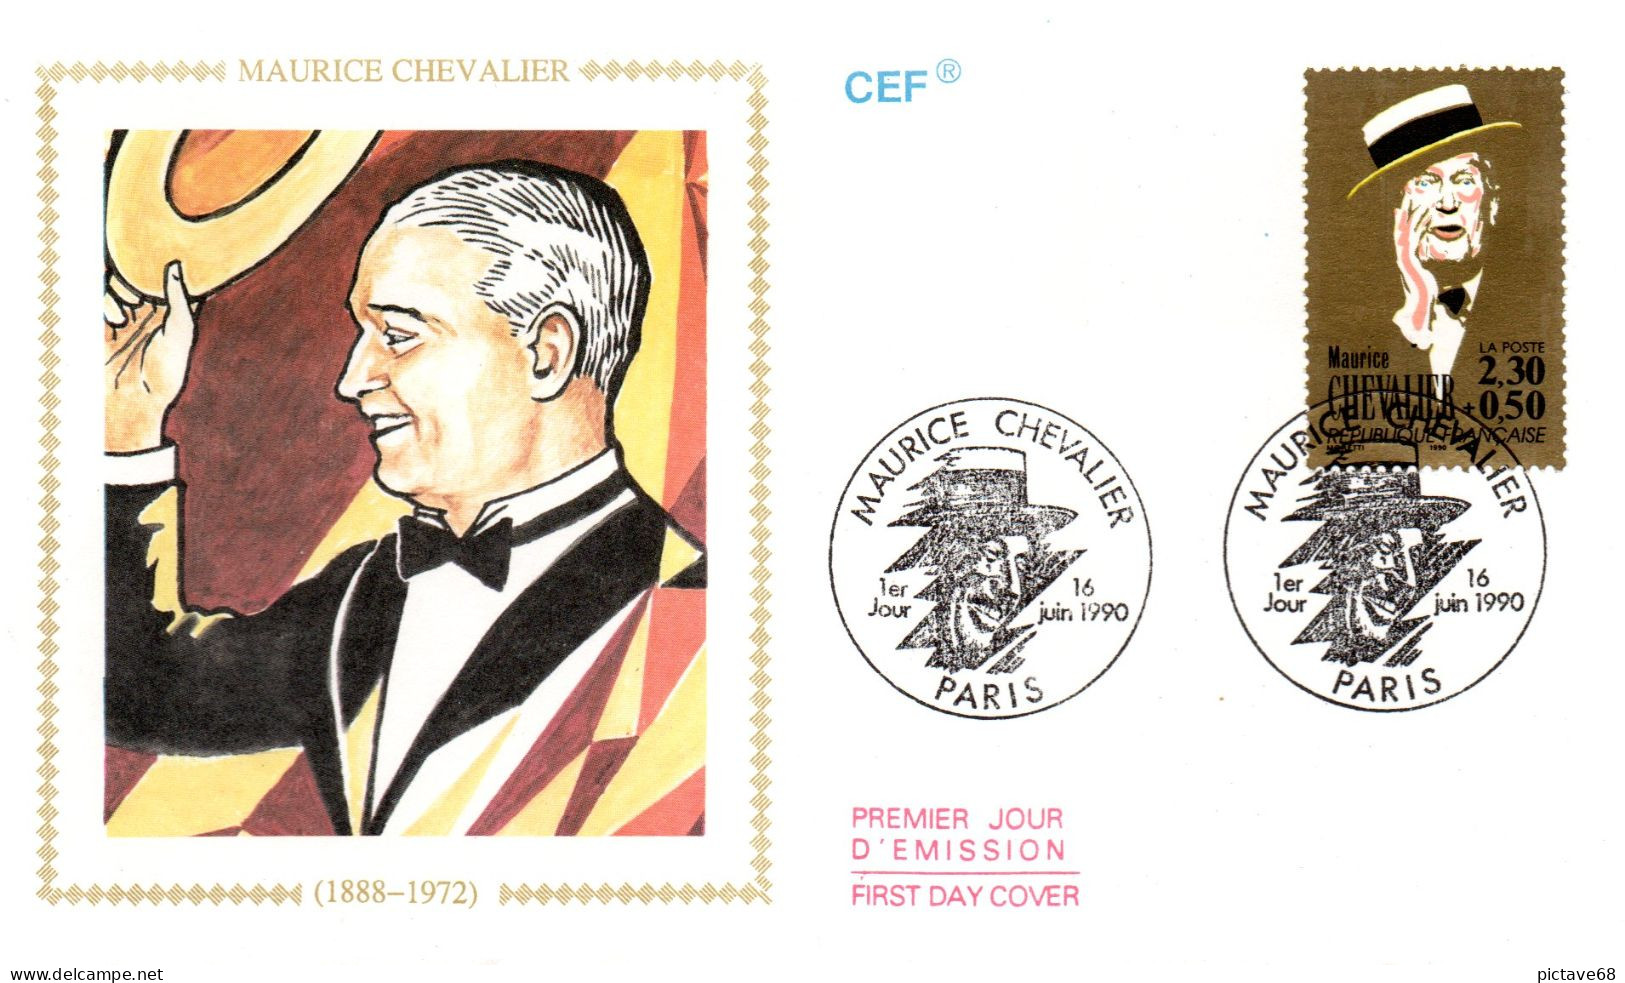 FRANCE / ENVELOPPE FDC N° 2650 MAURICE CHEVALIER - 1990-1999